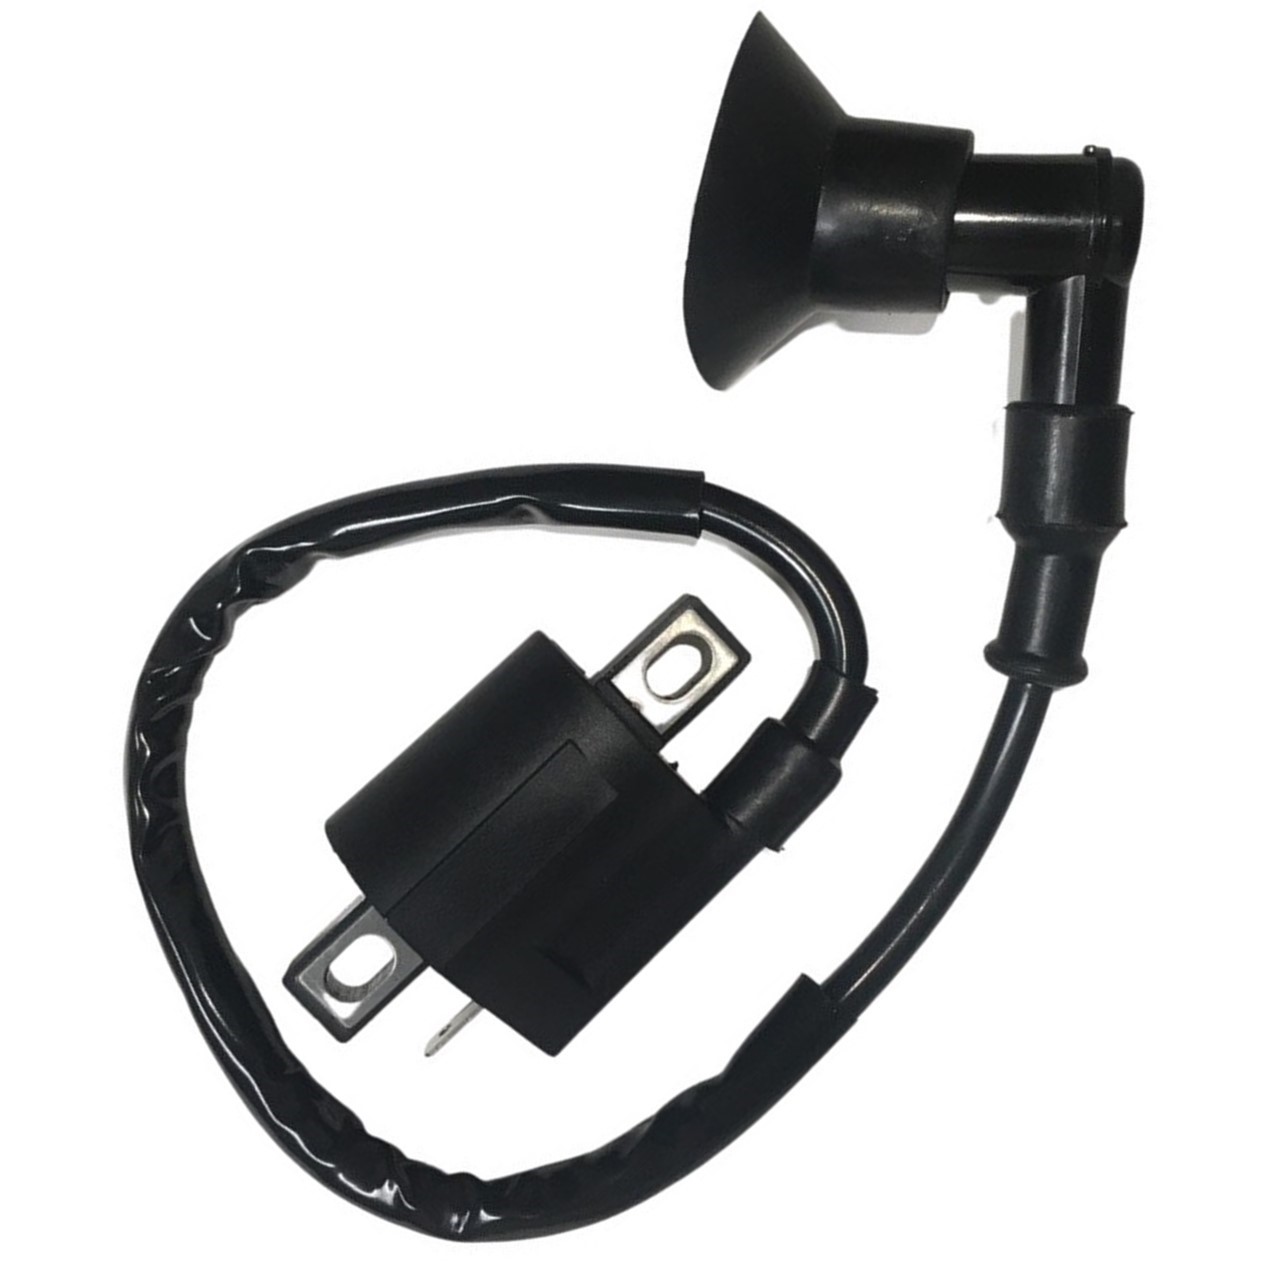 Ignition Coil Fits E-Ton Beamer 50 I,II,III, Matrix 50, 49cc Scooters + others - Click Image to Close